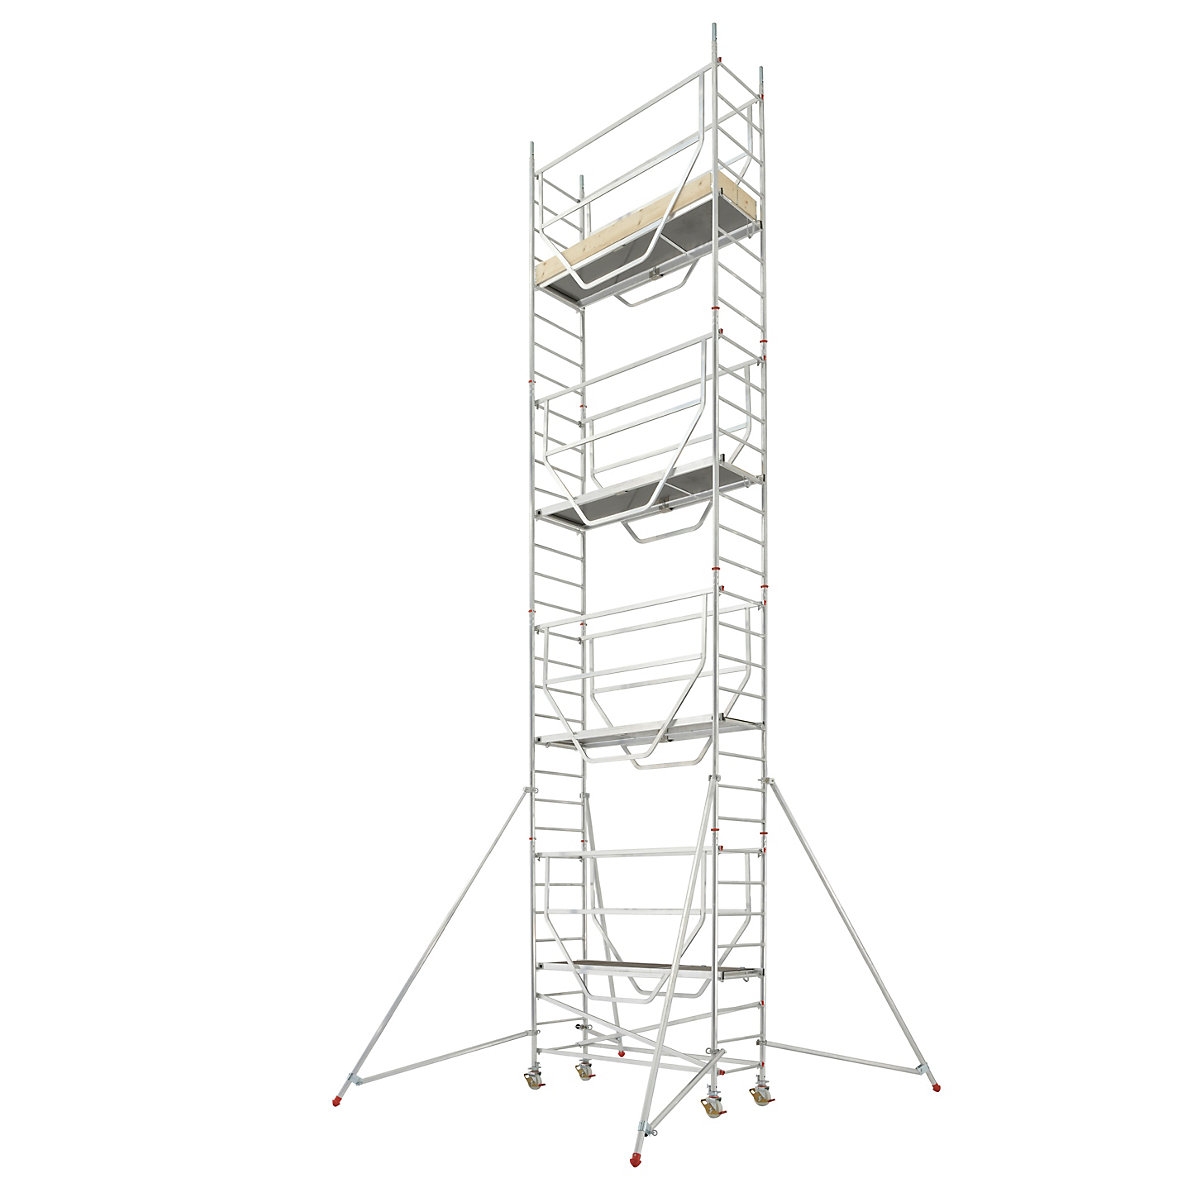 ADVANCED SAFE-T 7075 mobile access tower – HYMER, welded, platform 2.08 x 0.61 m, max. working height 9.25 m-17